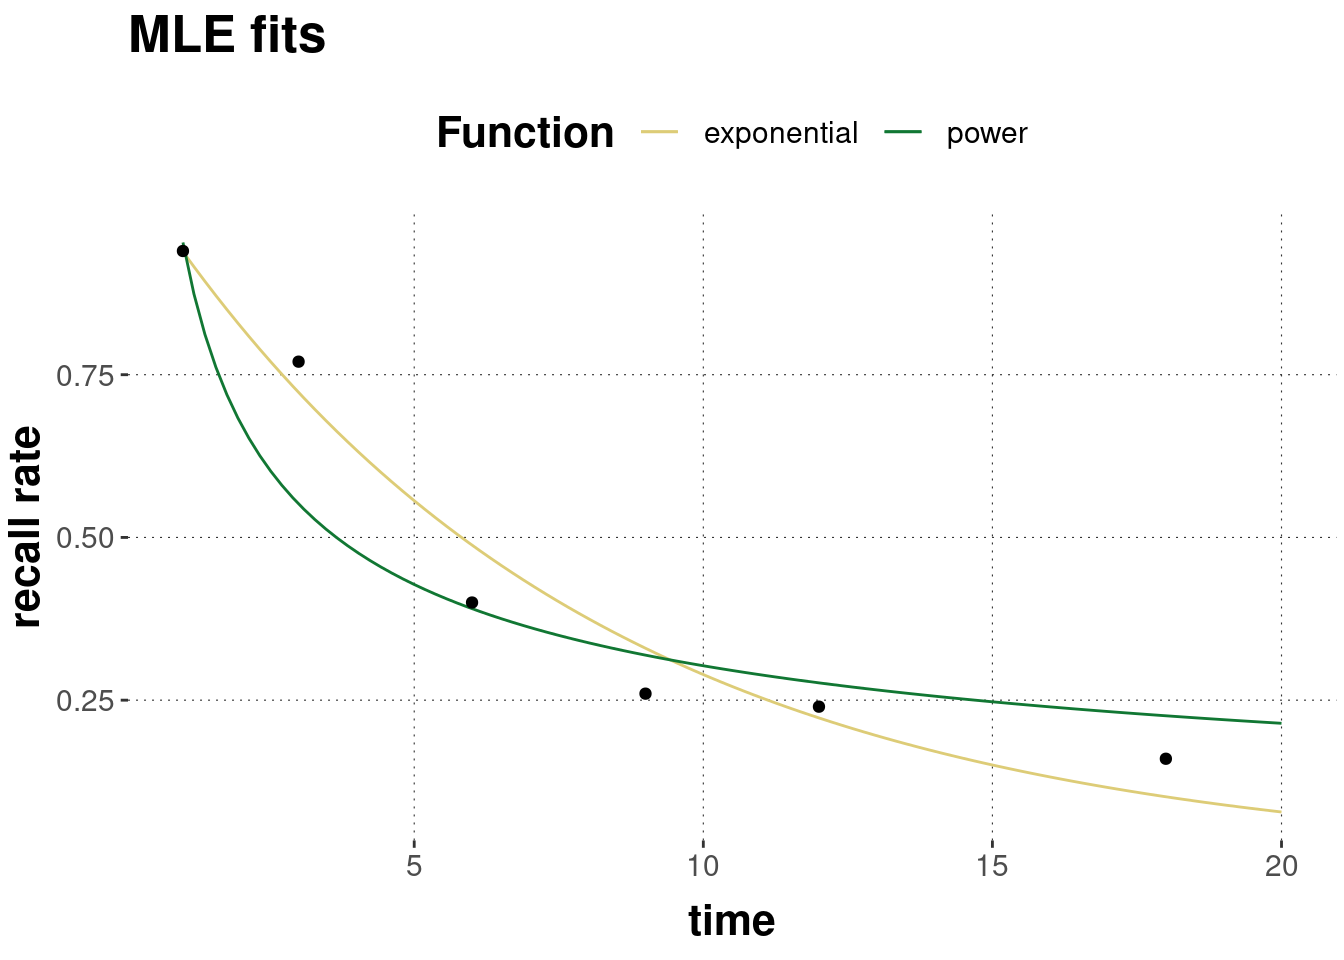 Predictions of the exponential and the power model under best-fitting parameter values.